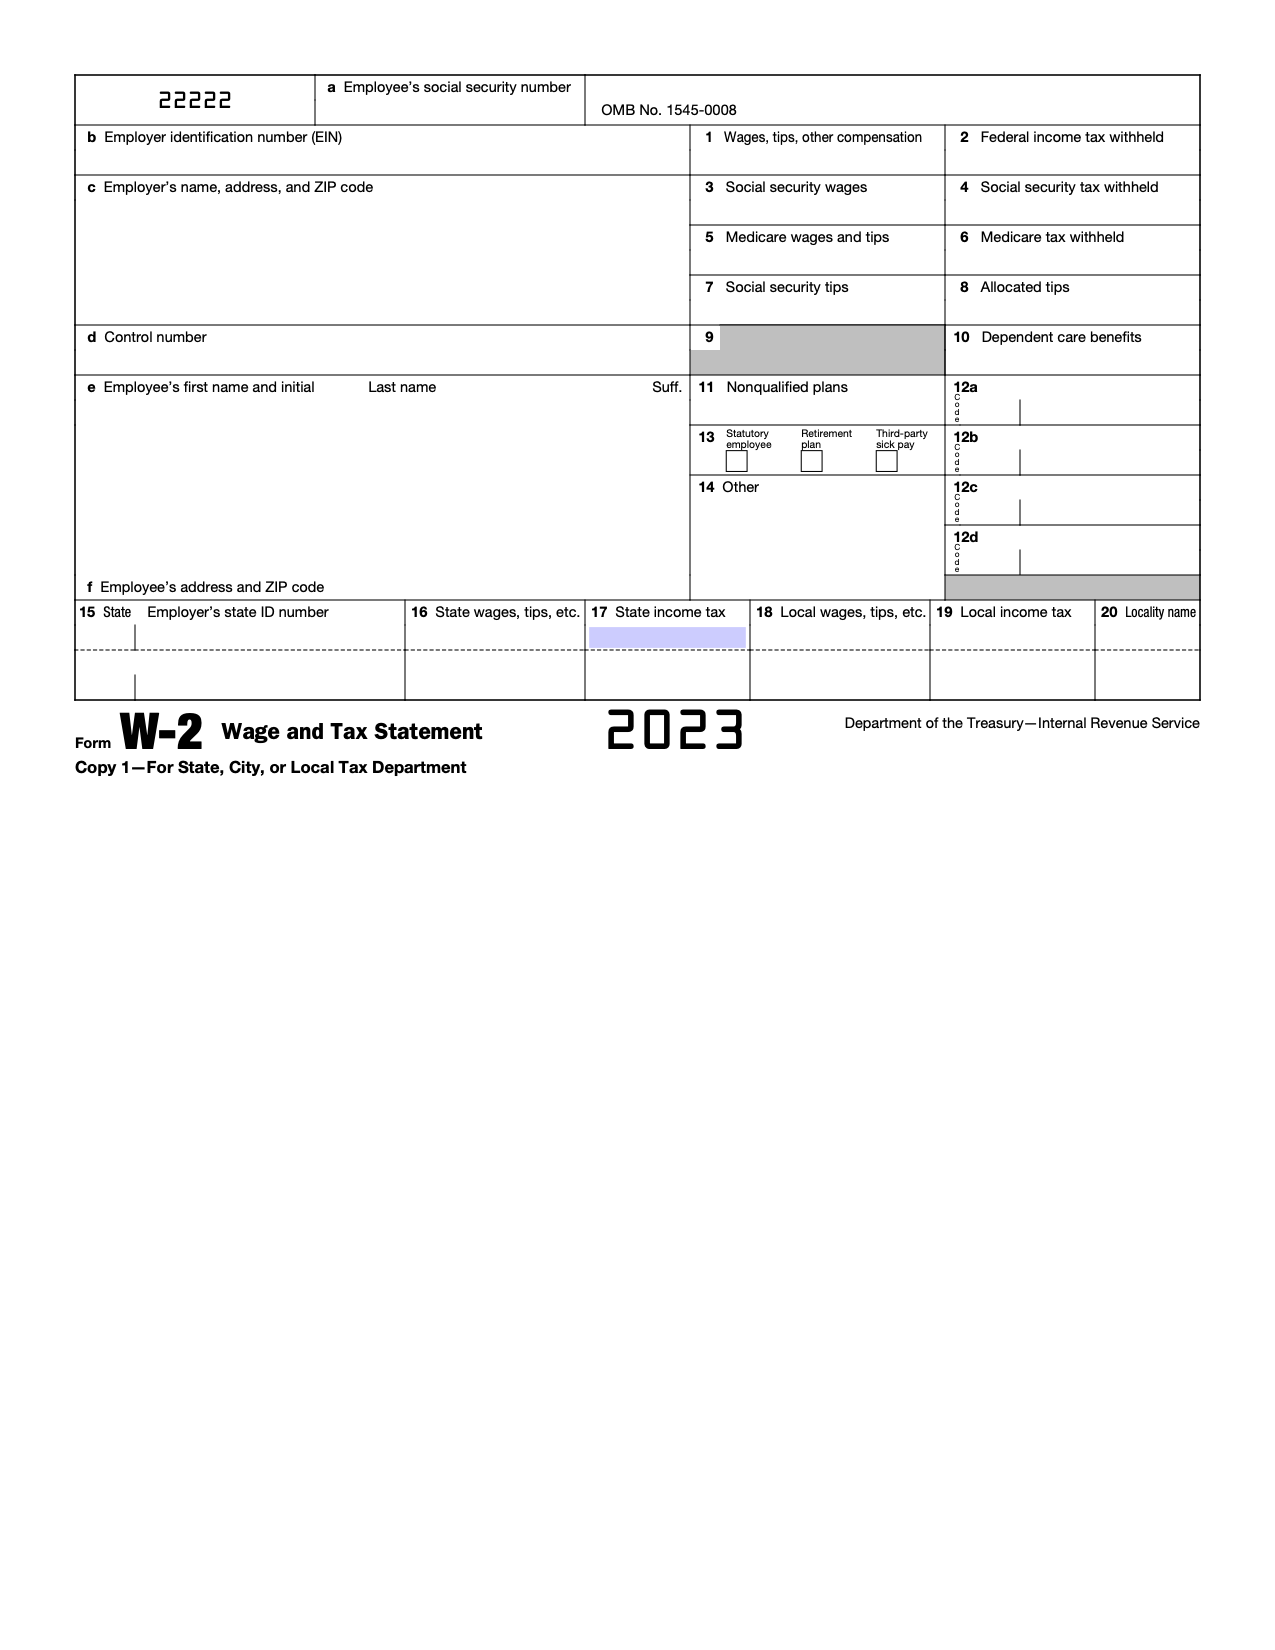 Free Irs Form W-2 | Wage And Tax Statement - Pdf – Eforms inside Fill W2 Form Online